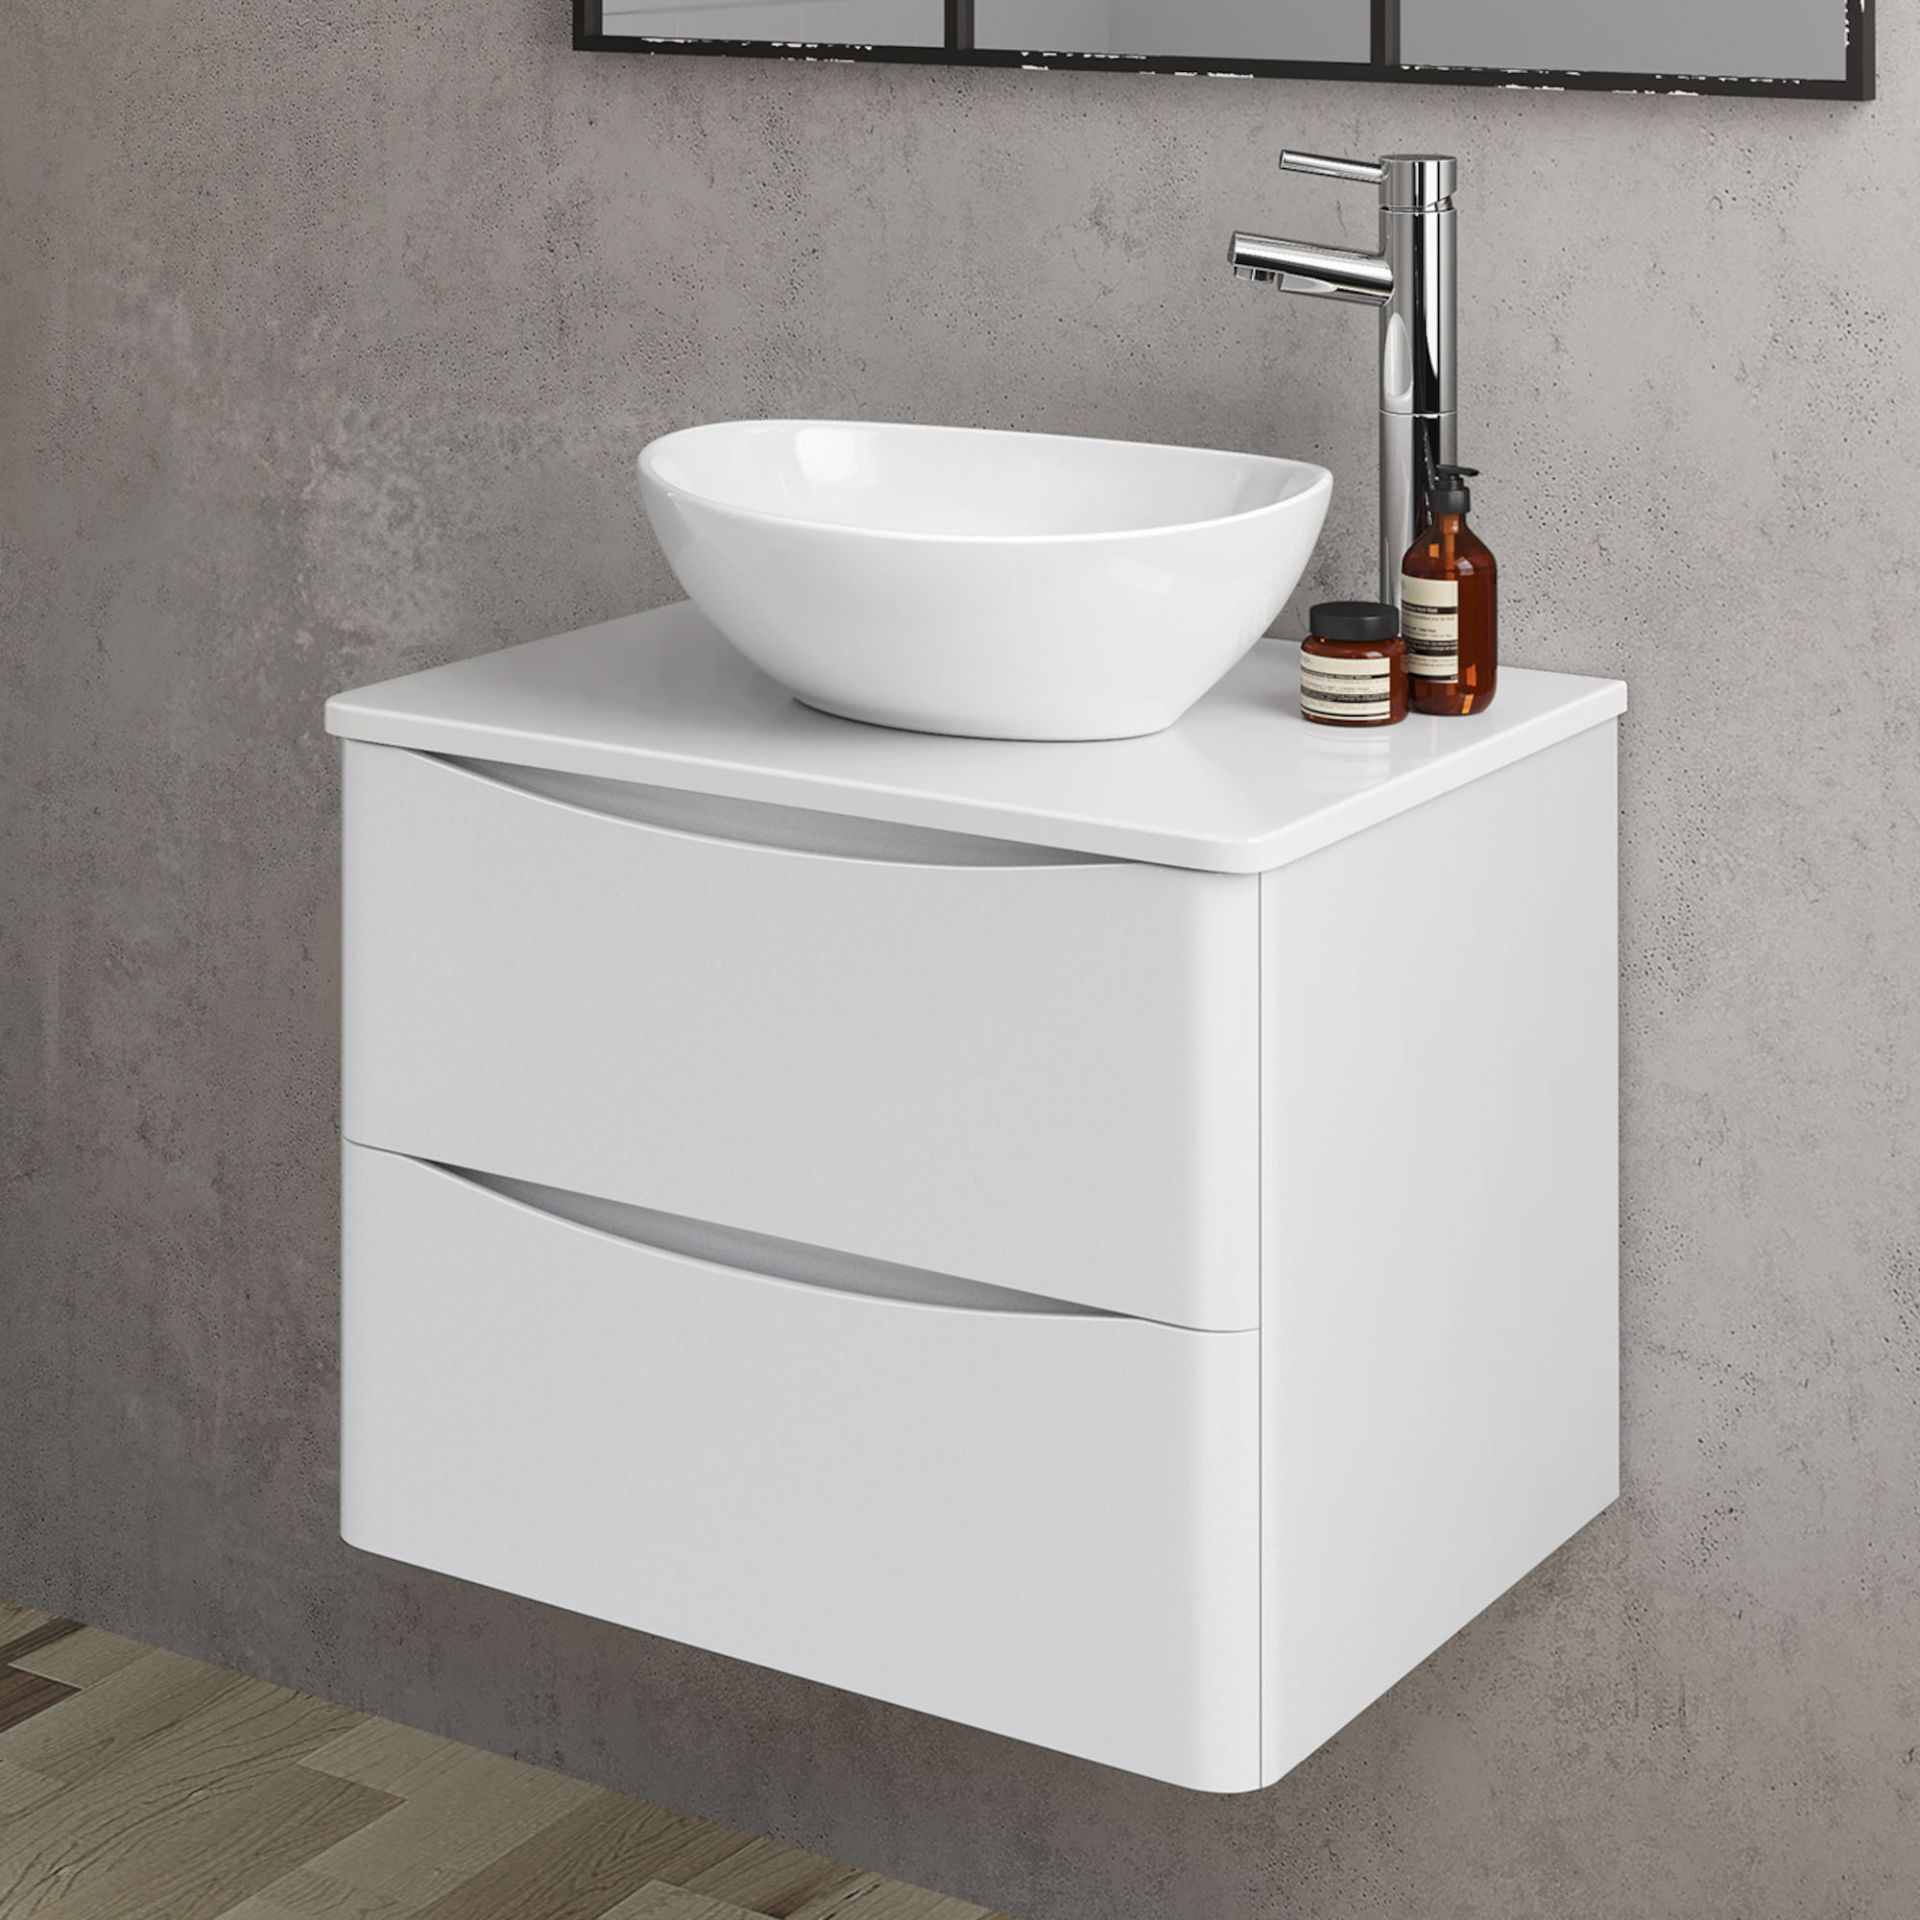 600mm Austin II Gloss White Countertop Unit and Camila Basin - Wall Hung. RRP £899.99.Comes co...